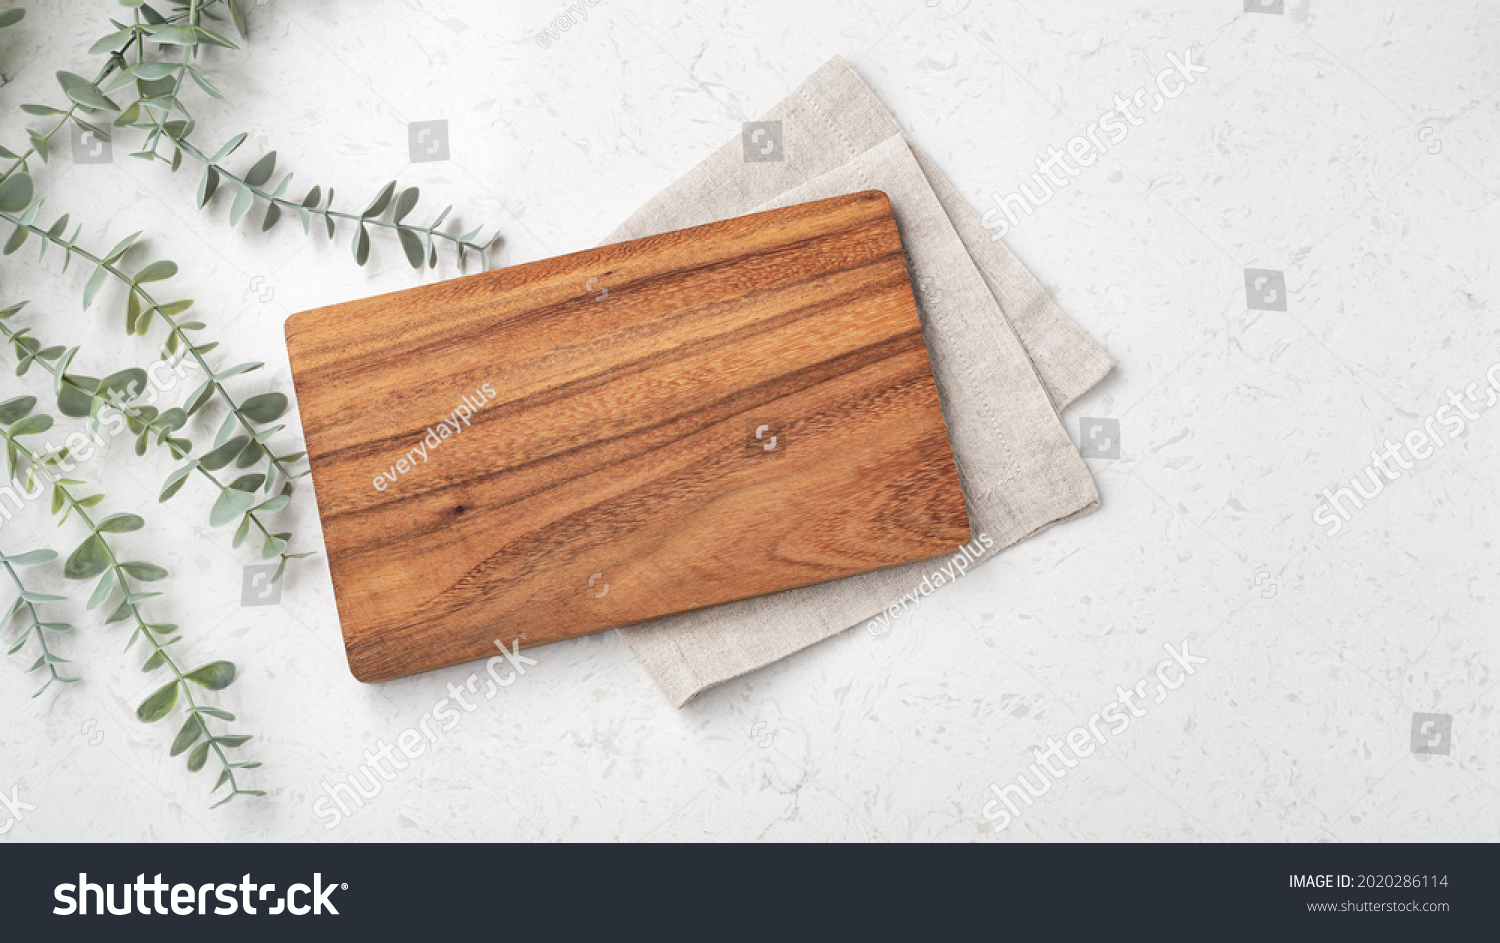 Wood cutting board with linen napkin and plant on marble table with copy space, top view #2020286114